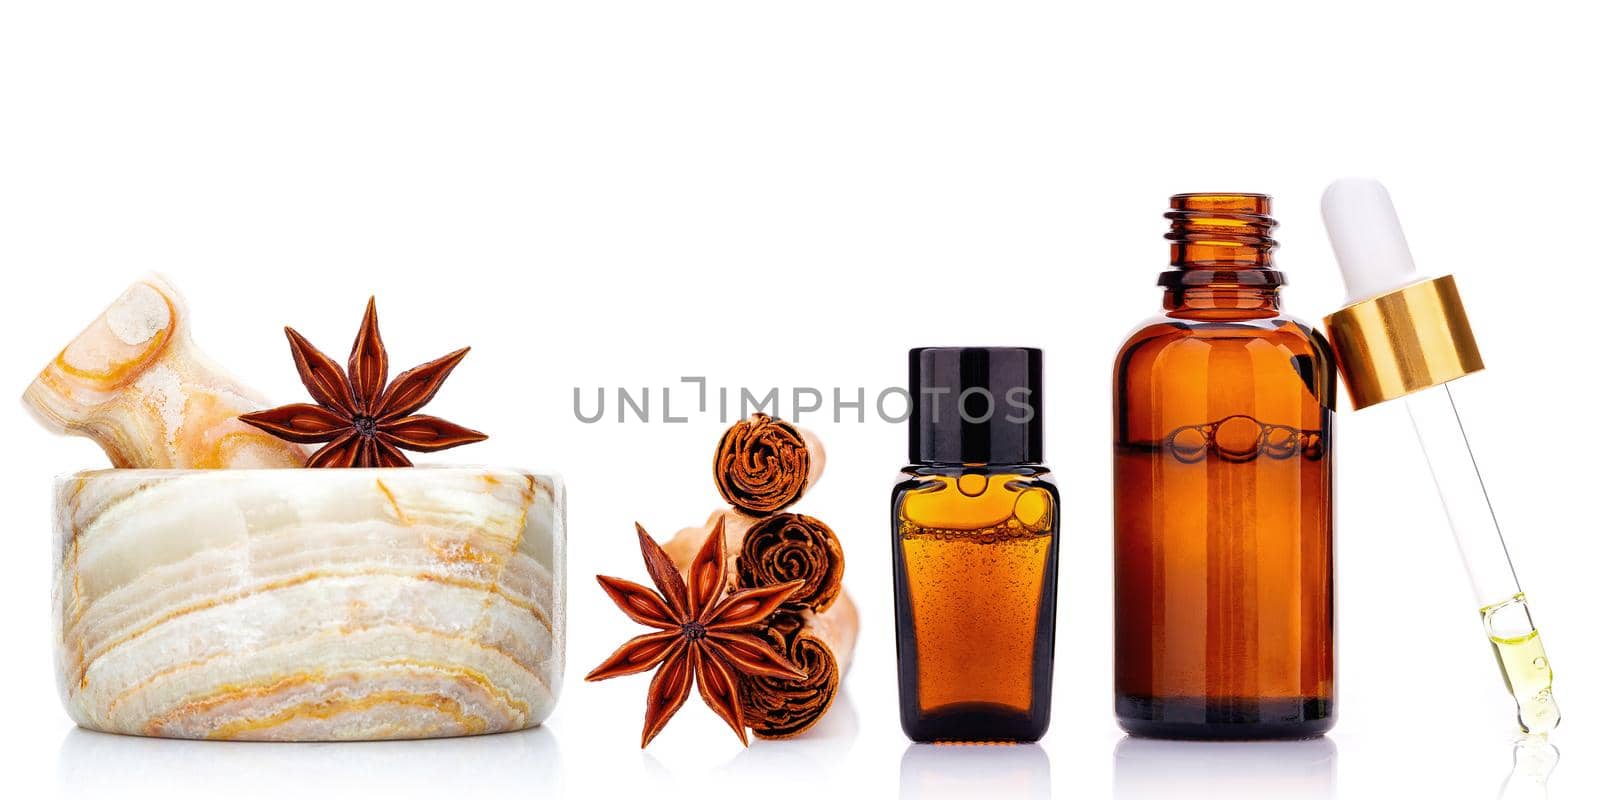 Cinnamon essential oil bottle with Ceylon cinnamon sticks and anise star isolated on white background .
 by kerdkanno